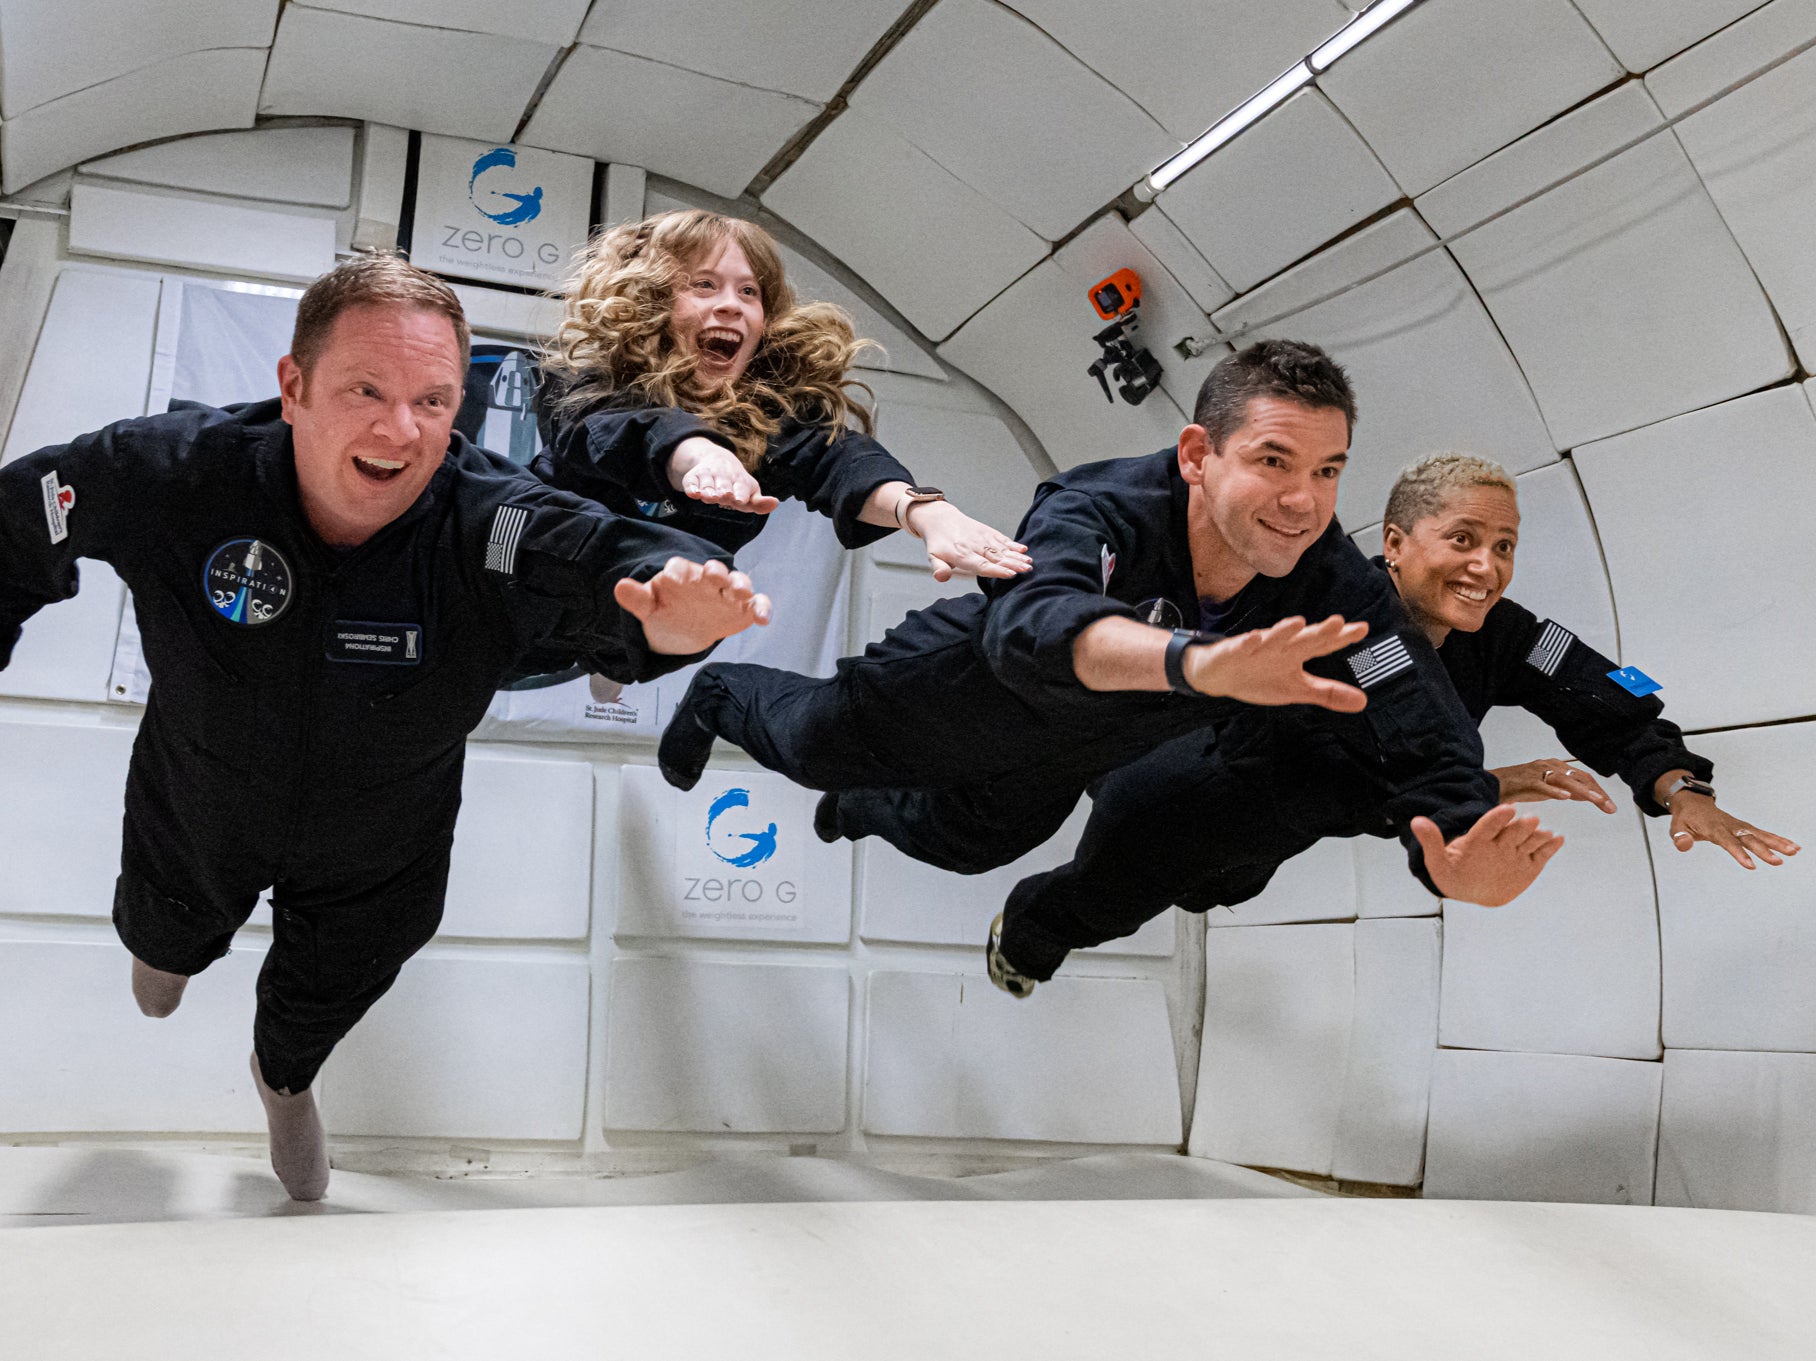 Chris Sembroski, Hayley Arceneaux, Jared Isaacman, and Dr Sian Proctor in ‘Countdown: Inspiration4 Mission to Space'